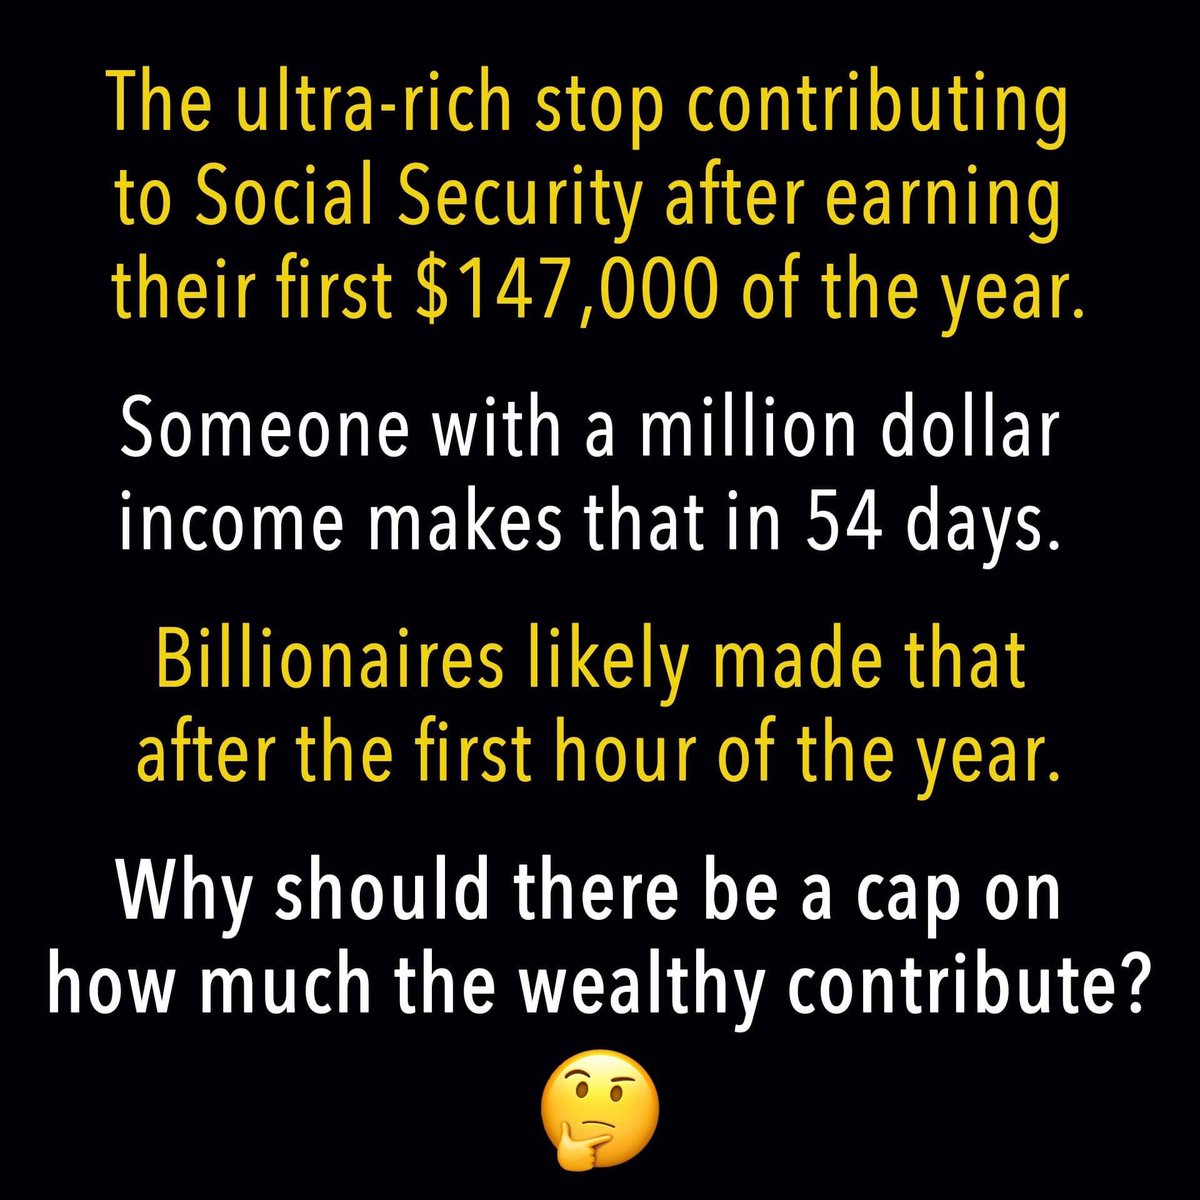 If we eliminate the taxation cap on earnings, social security would be forever solvent.